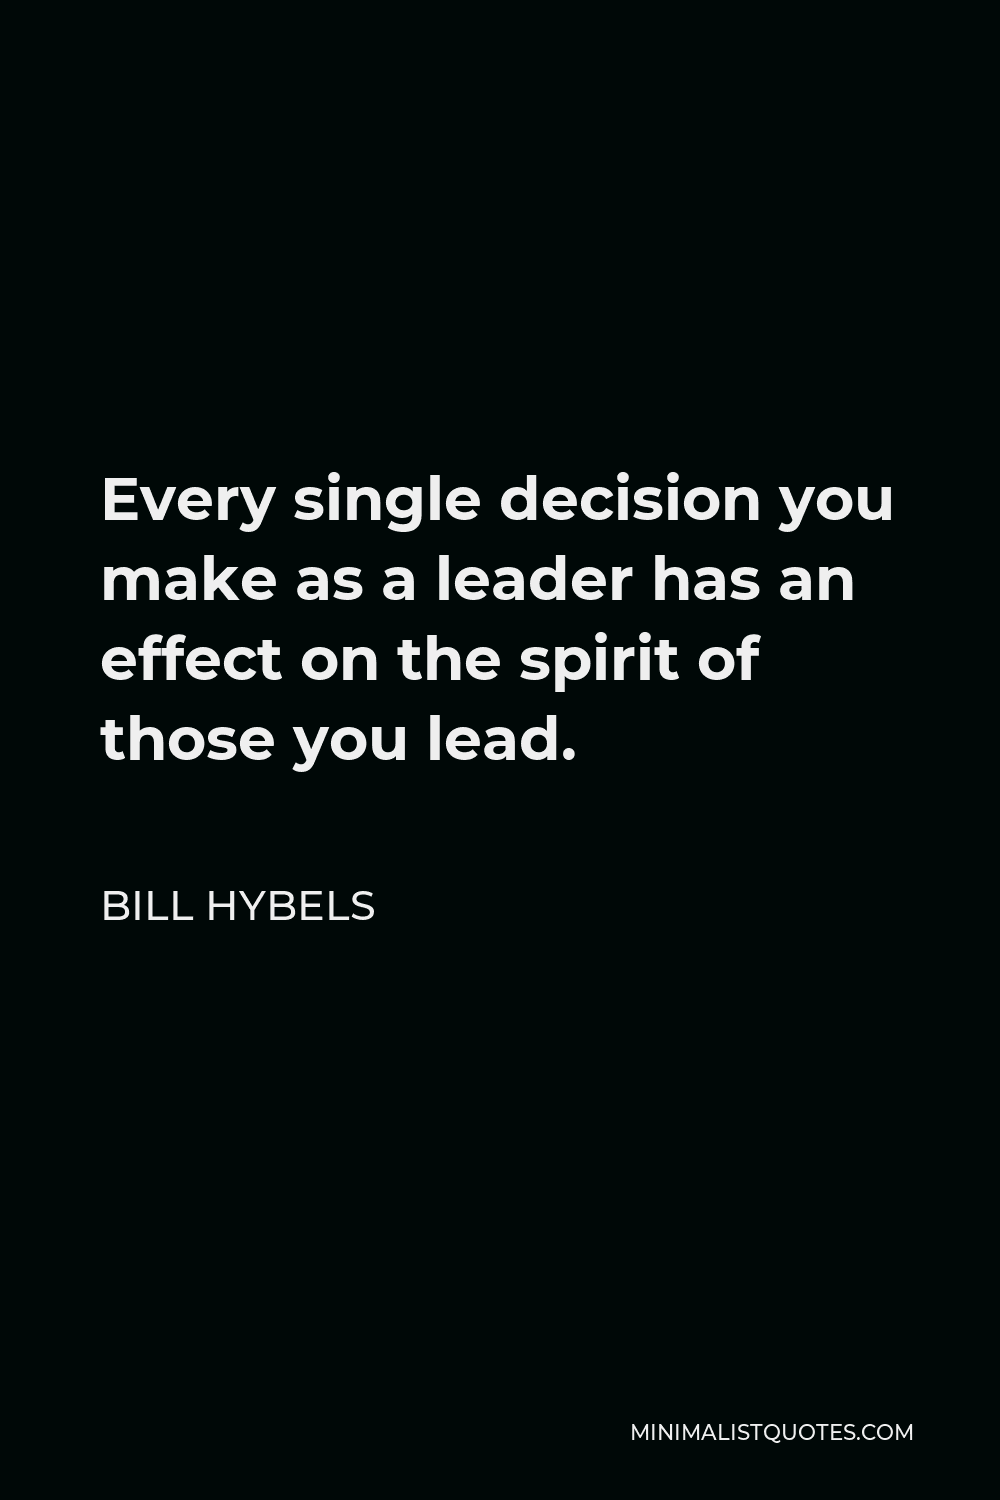 Bill Hybels Quote - Every single decision you make as a leader has an effect on the spirit of those you lead.